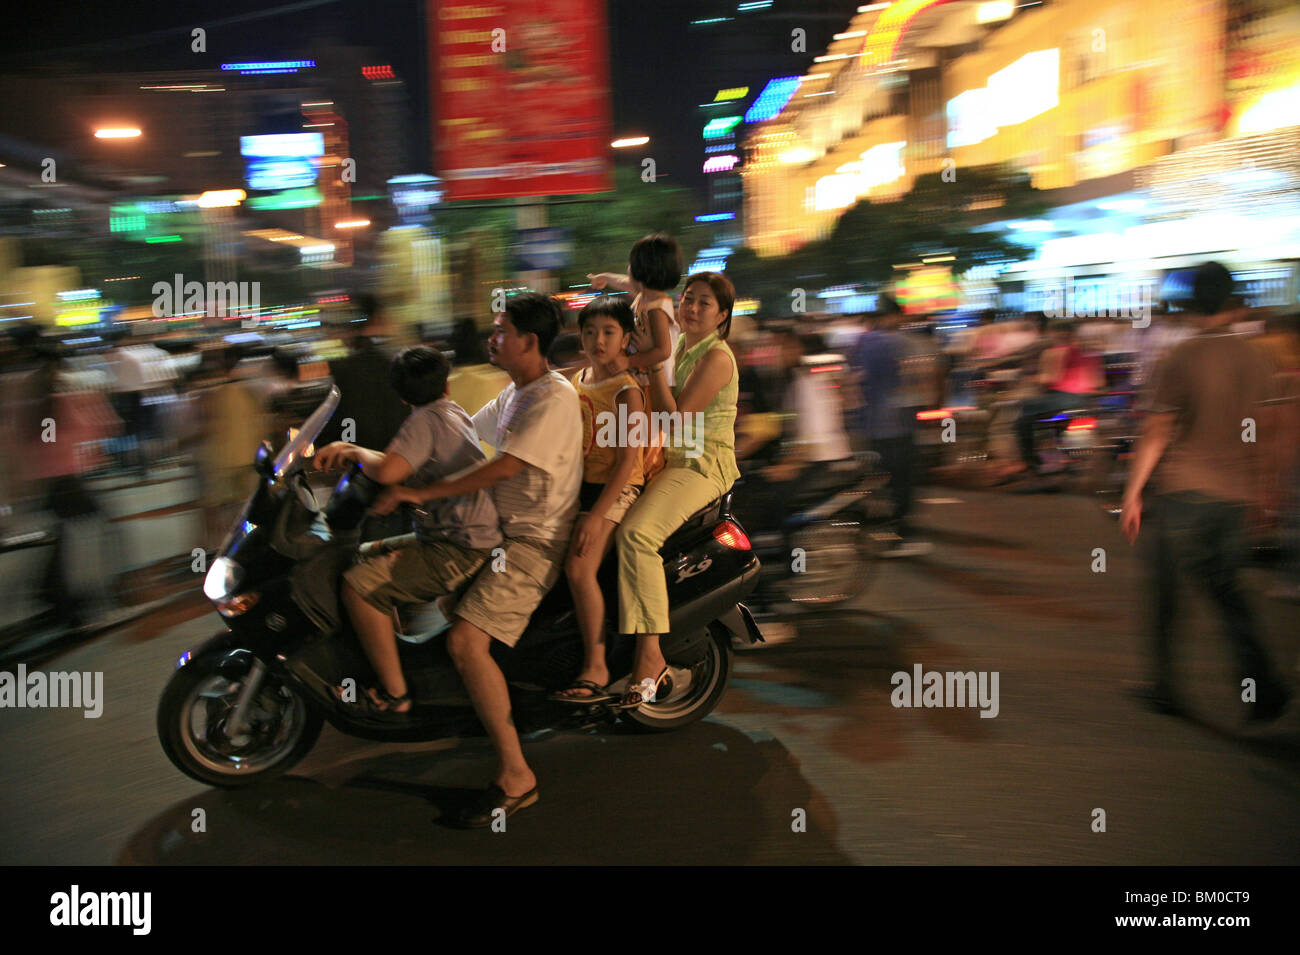 Family with children driving a scooter during the Tet festival at night, Saigon Ho Chi Minh City, Vietnam, Asia Stock Photo